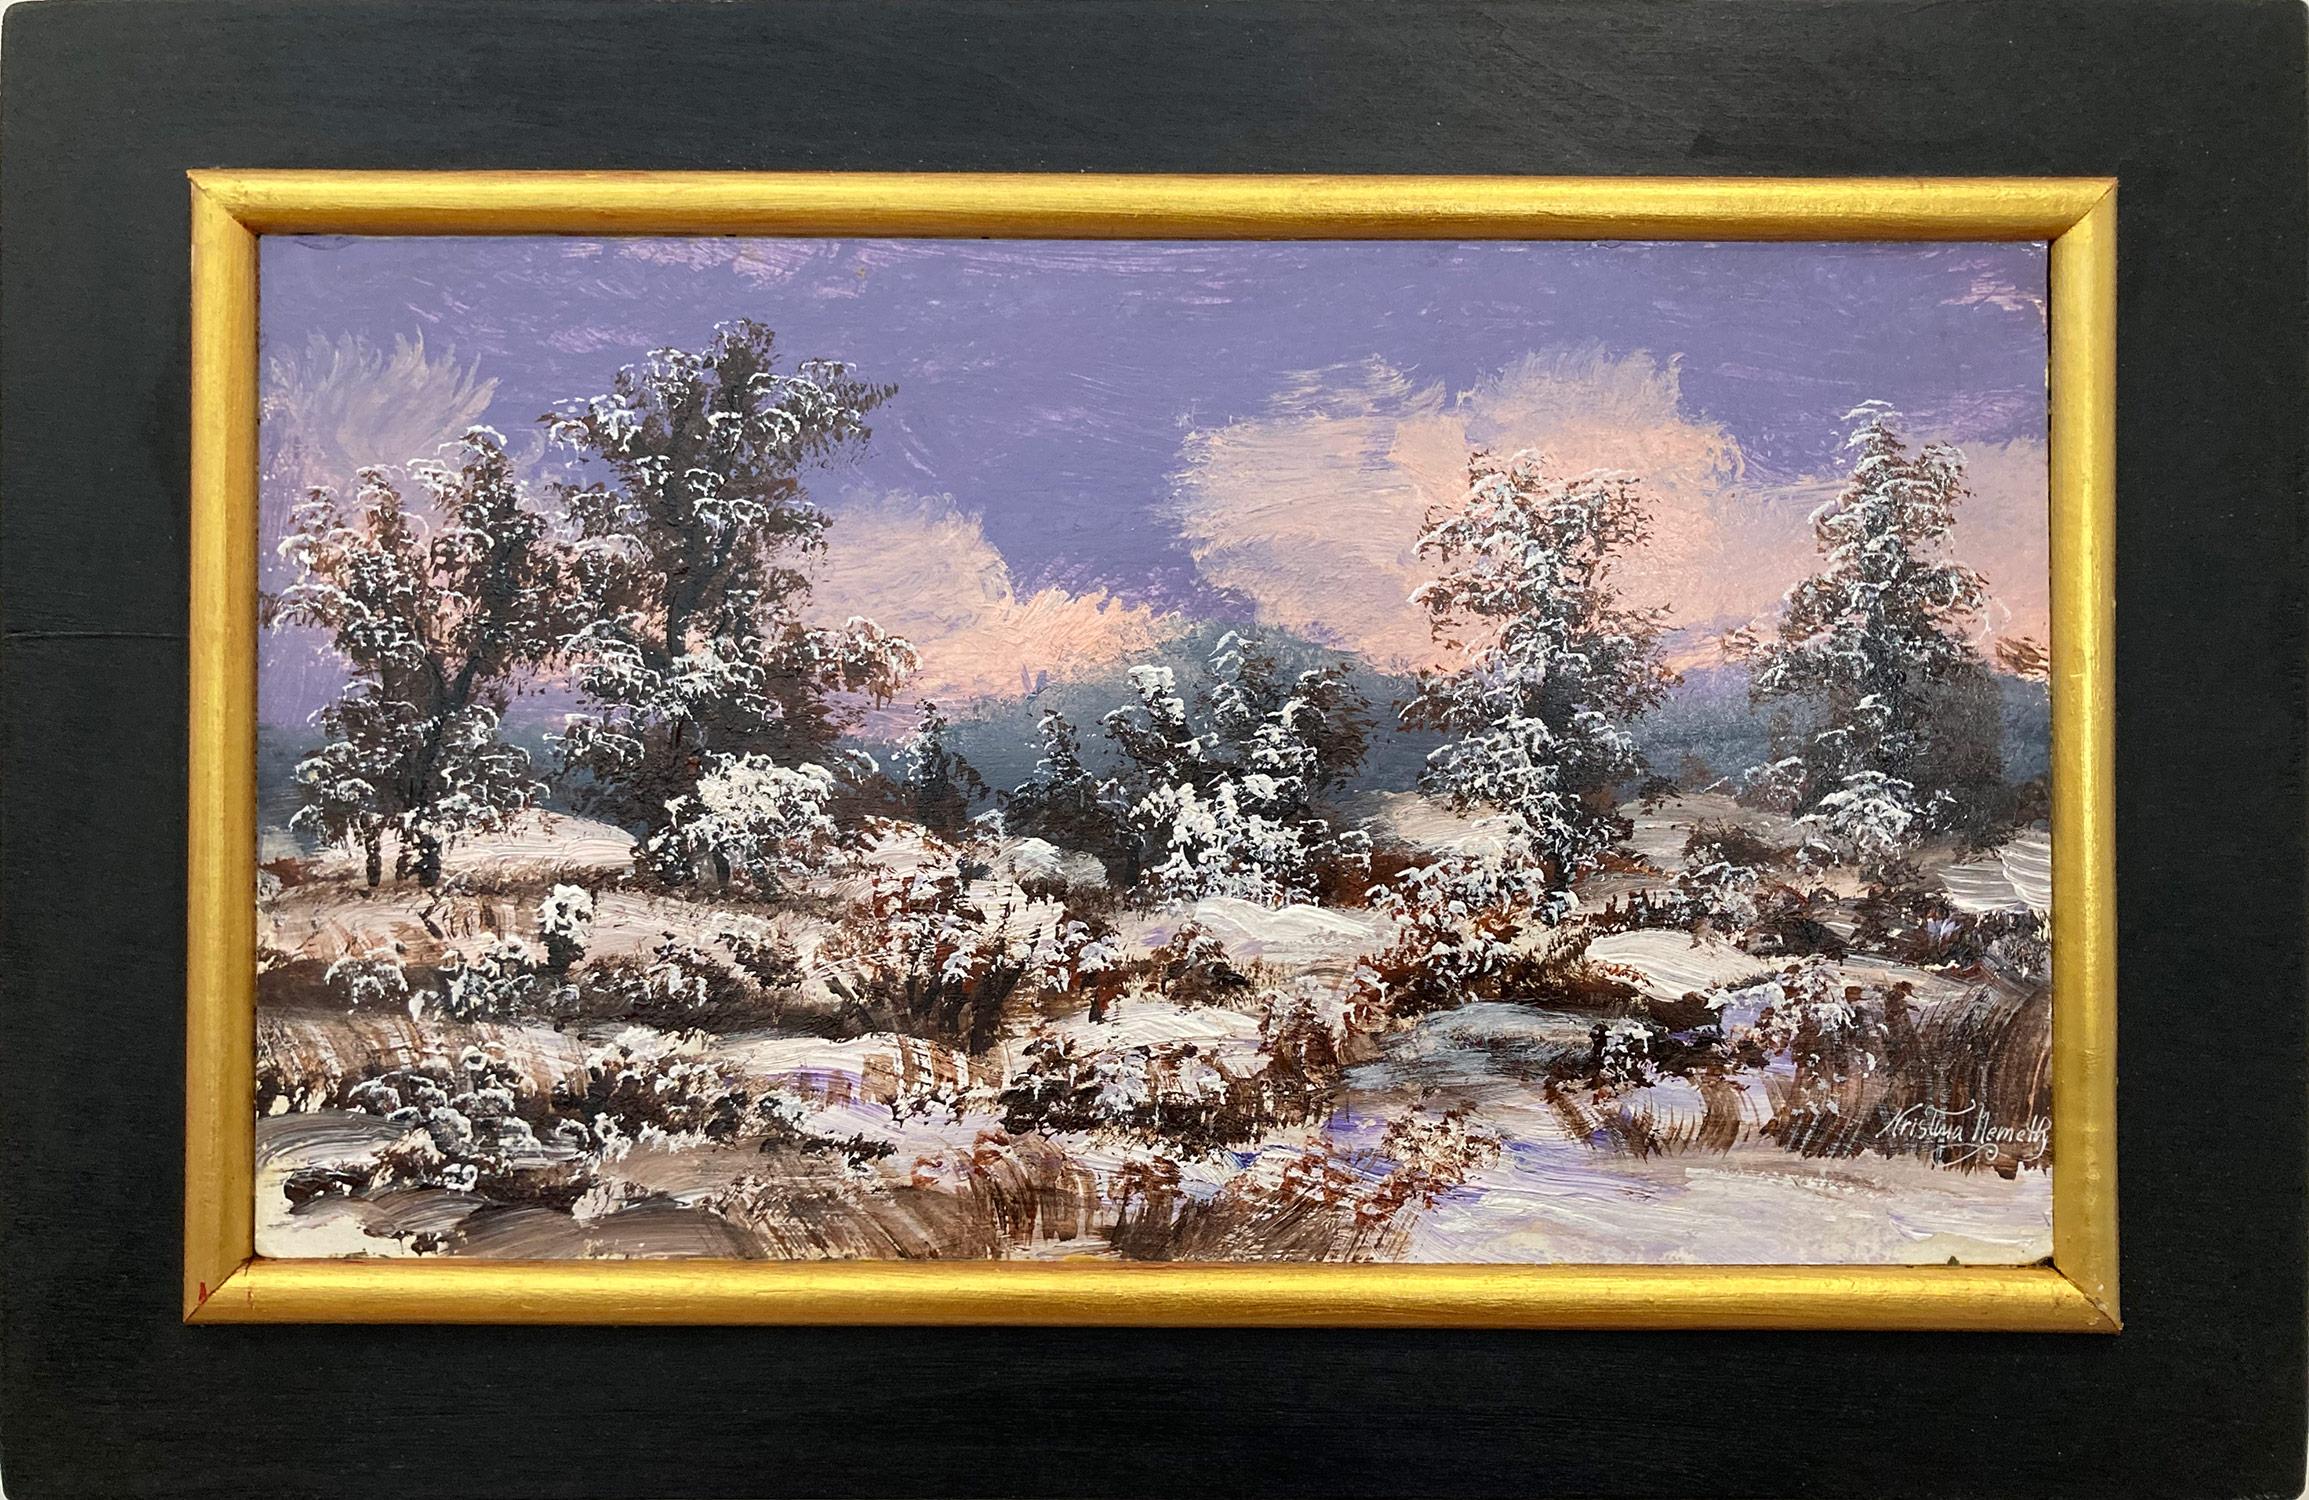 Kristina Nemethy Landscape Painting - "Winter on Hill Top" American Snow Scene Oil Painting on Board Miniature Details